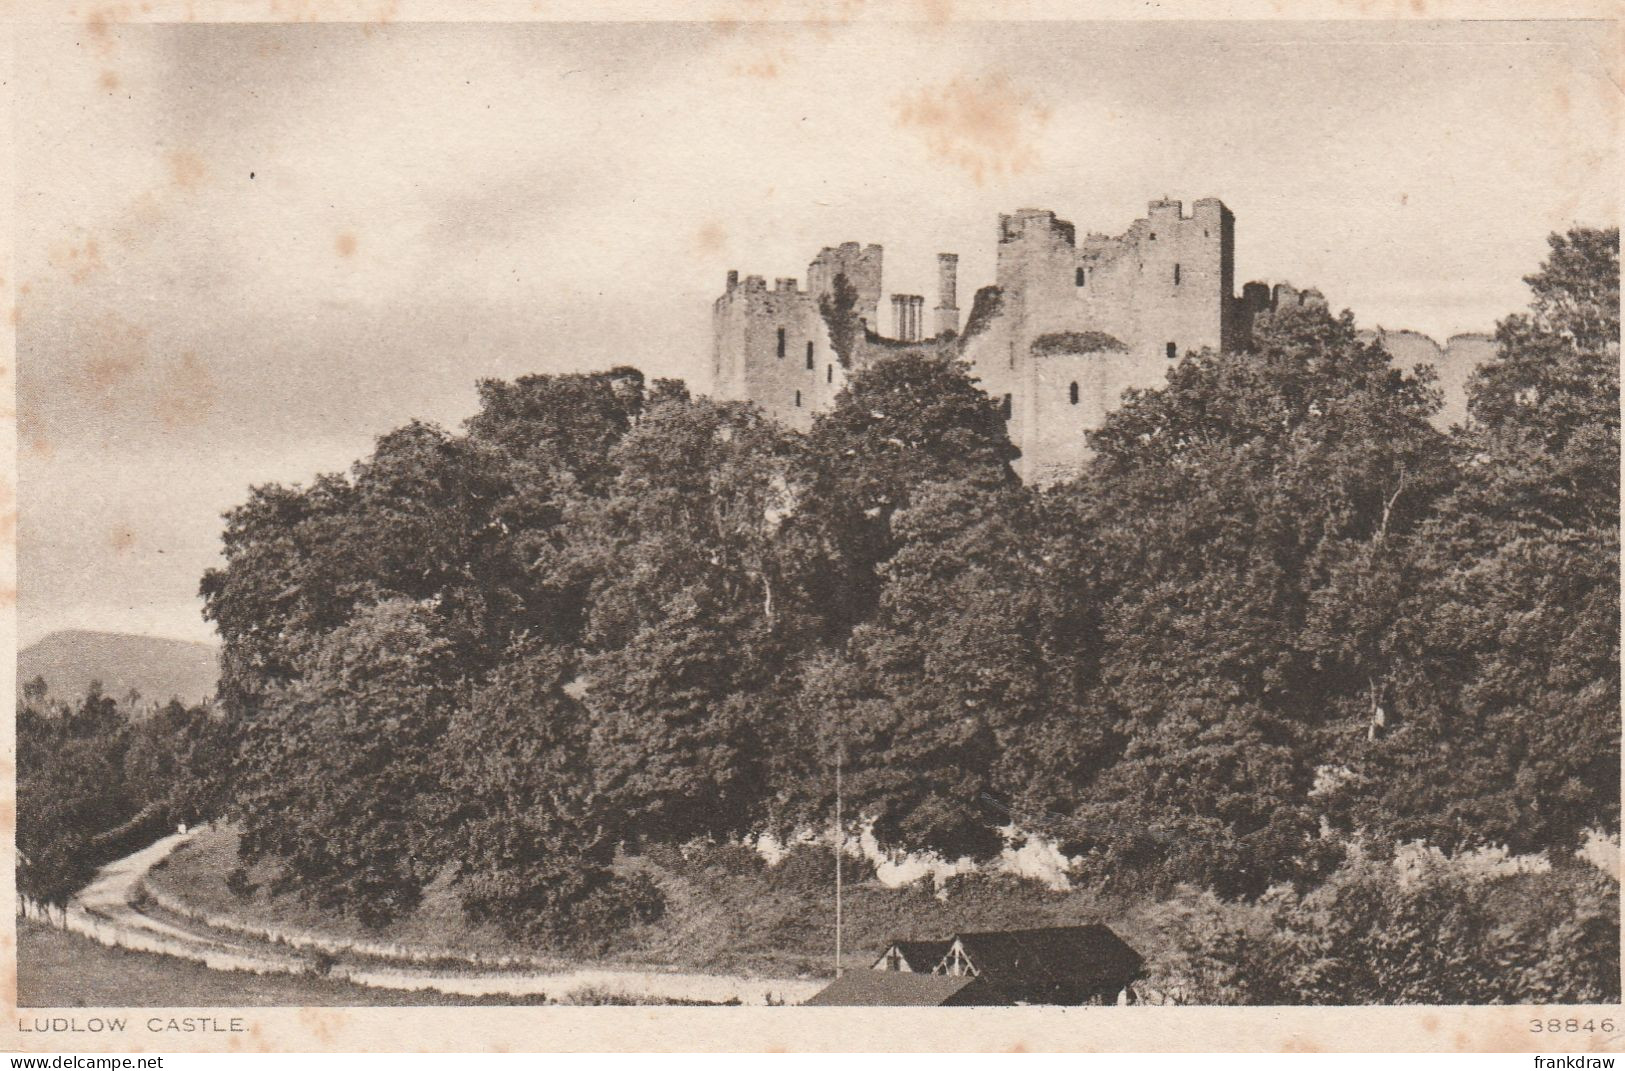 Postcard - Ludlow Castle - Very Early Card No.38846 - Good - Unclassified